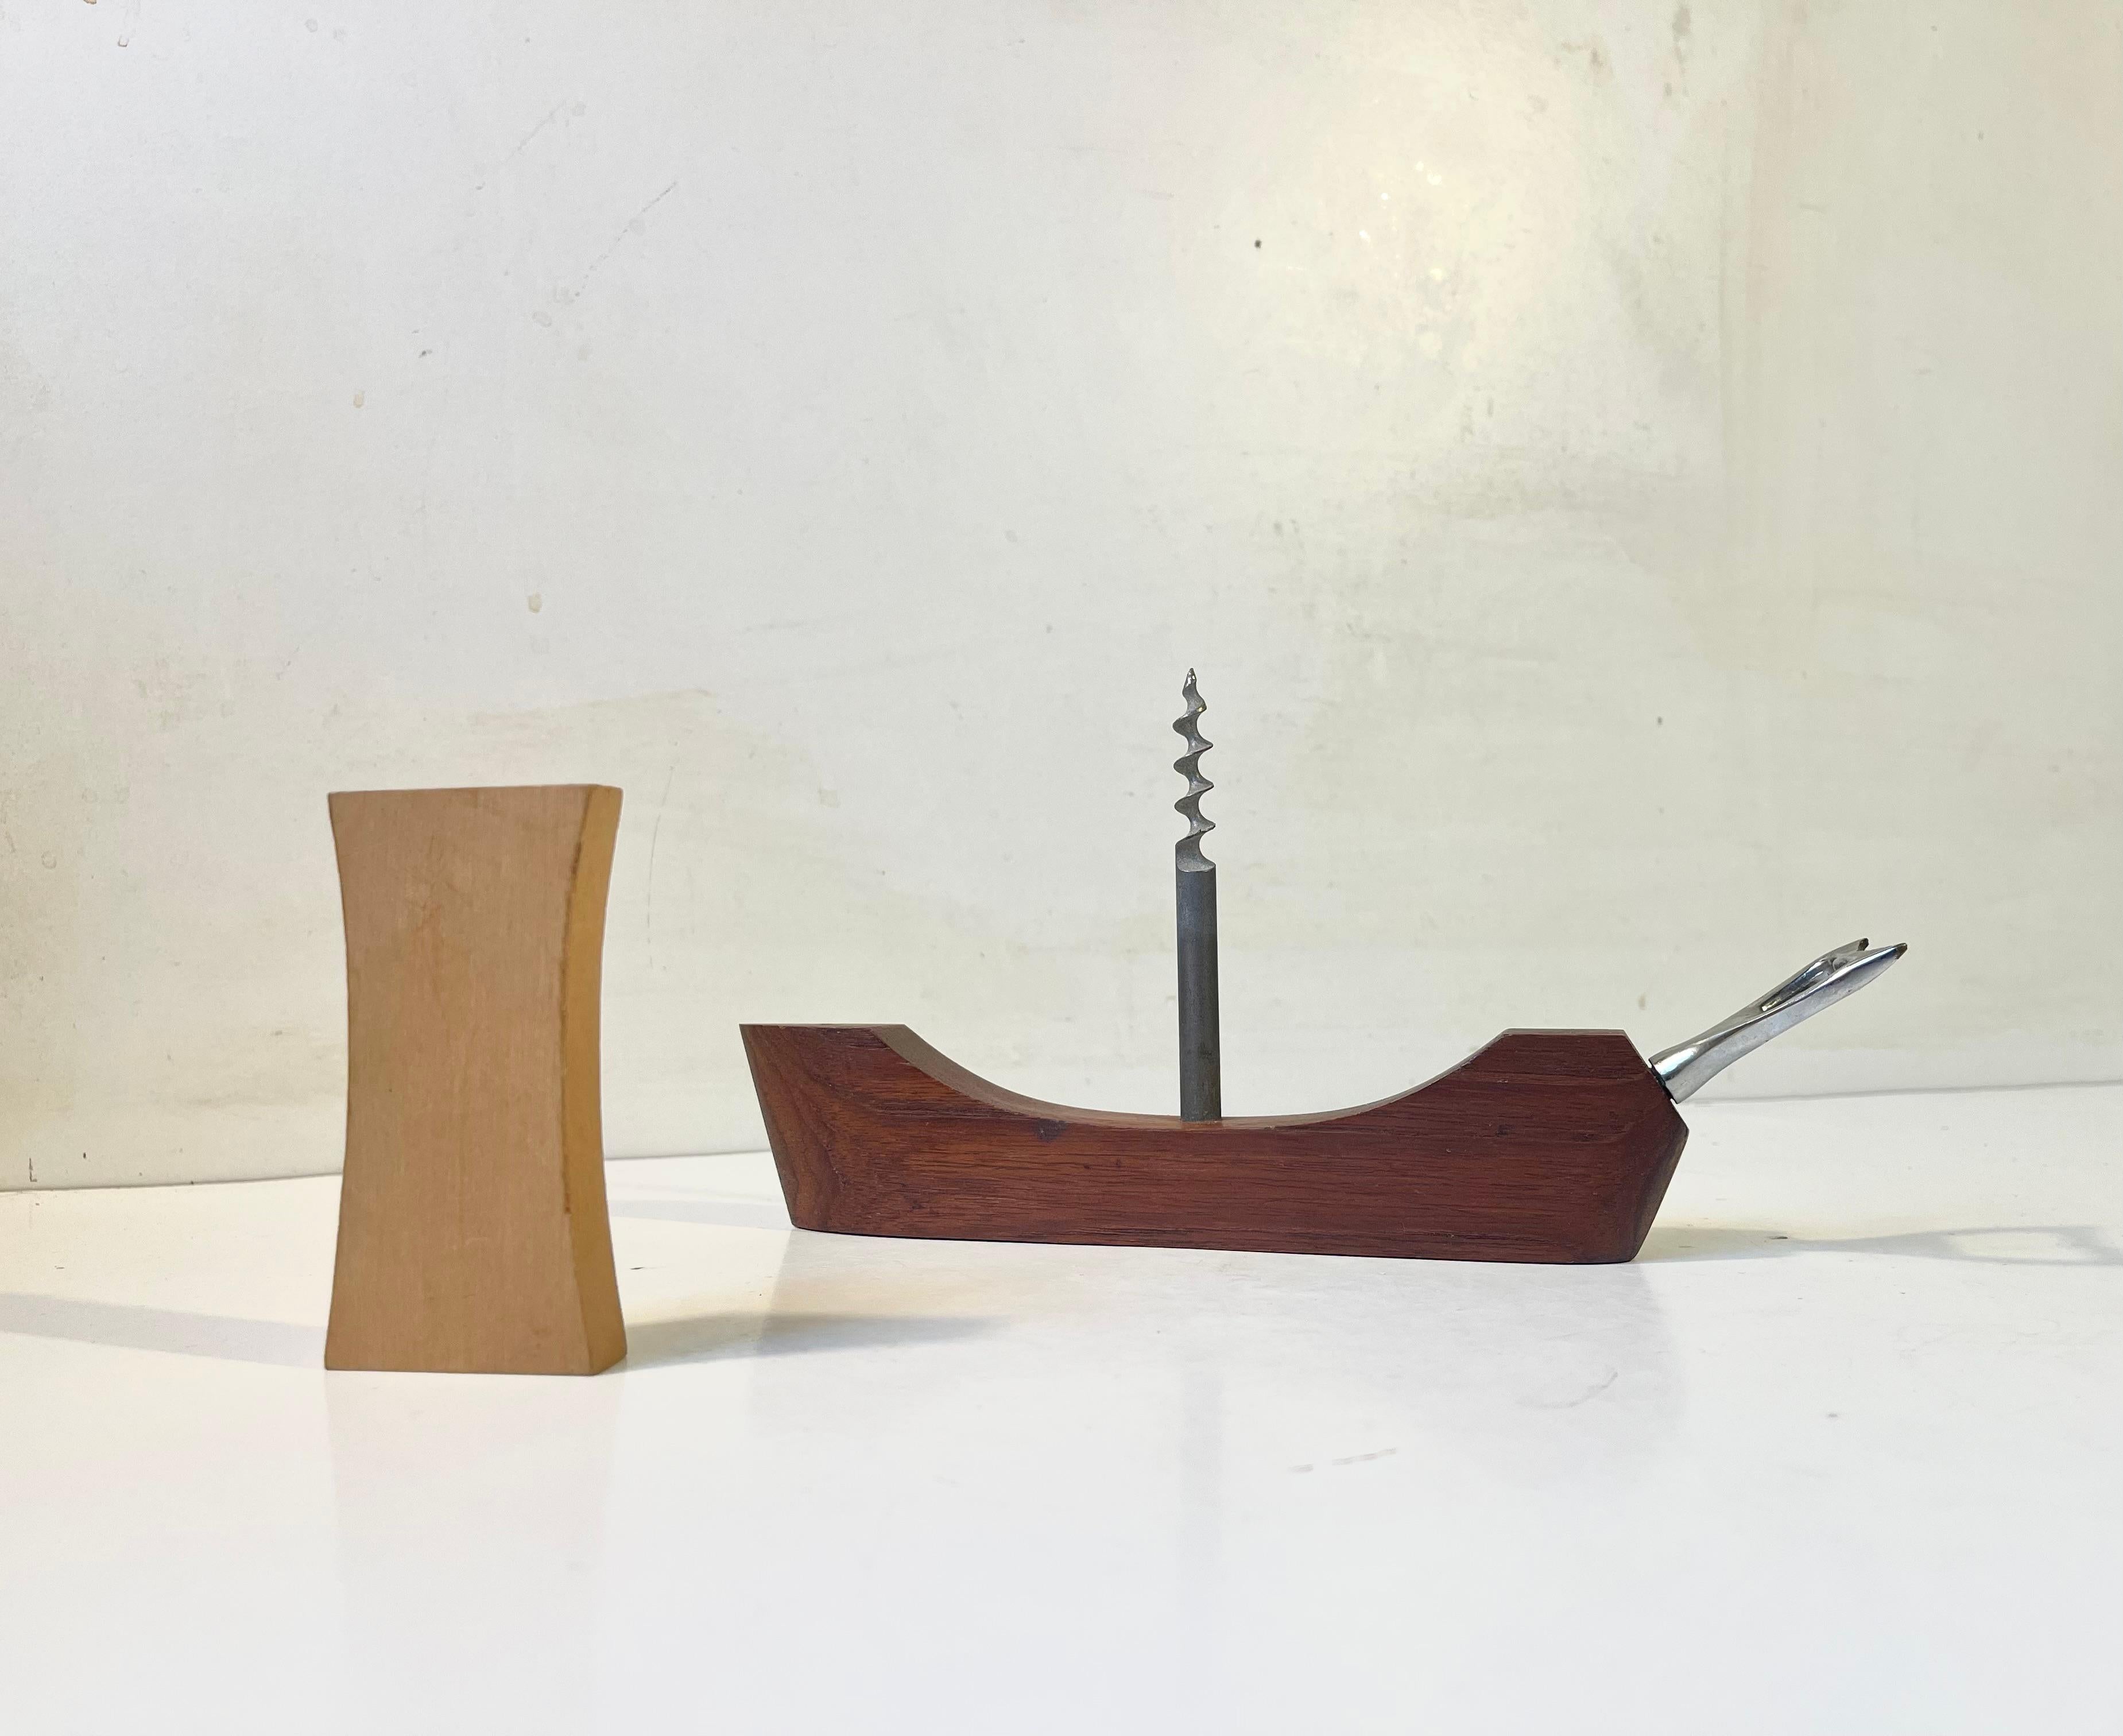 Beautiful handmade, sanded and polished solid teak and white beech viking ship. Two functions incorporated: boat bottle opener and a corkscrew hidden within the sail. It was designed in Denmark during the early 1960s and was among other distributed